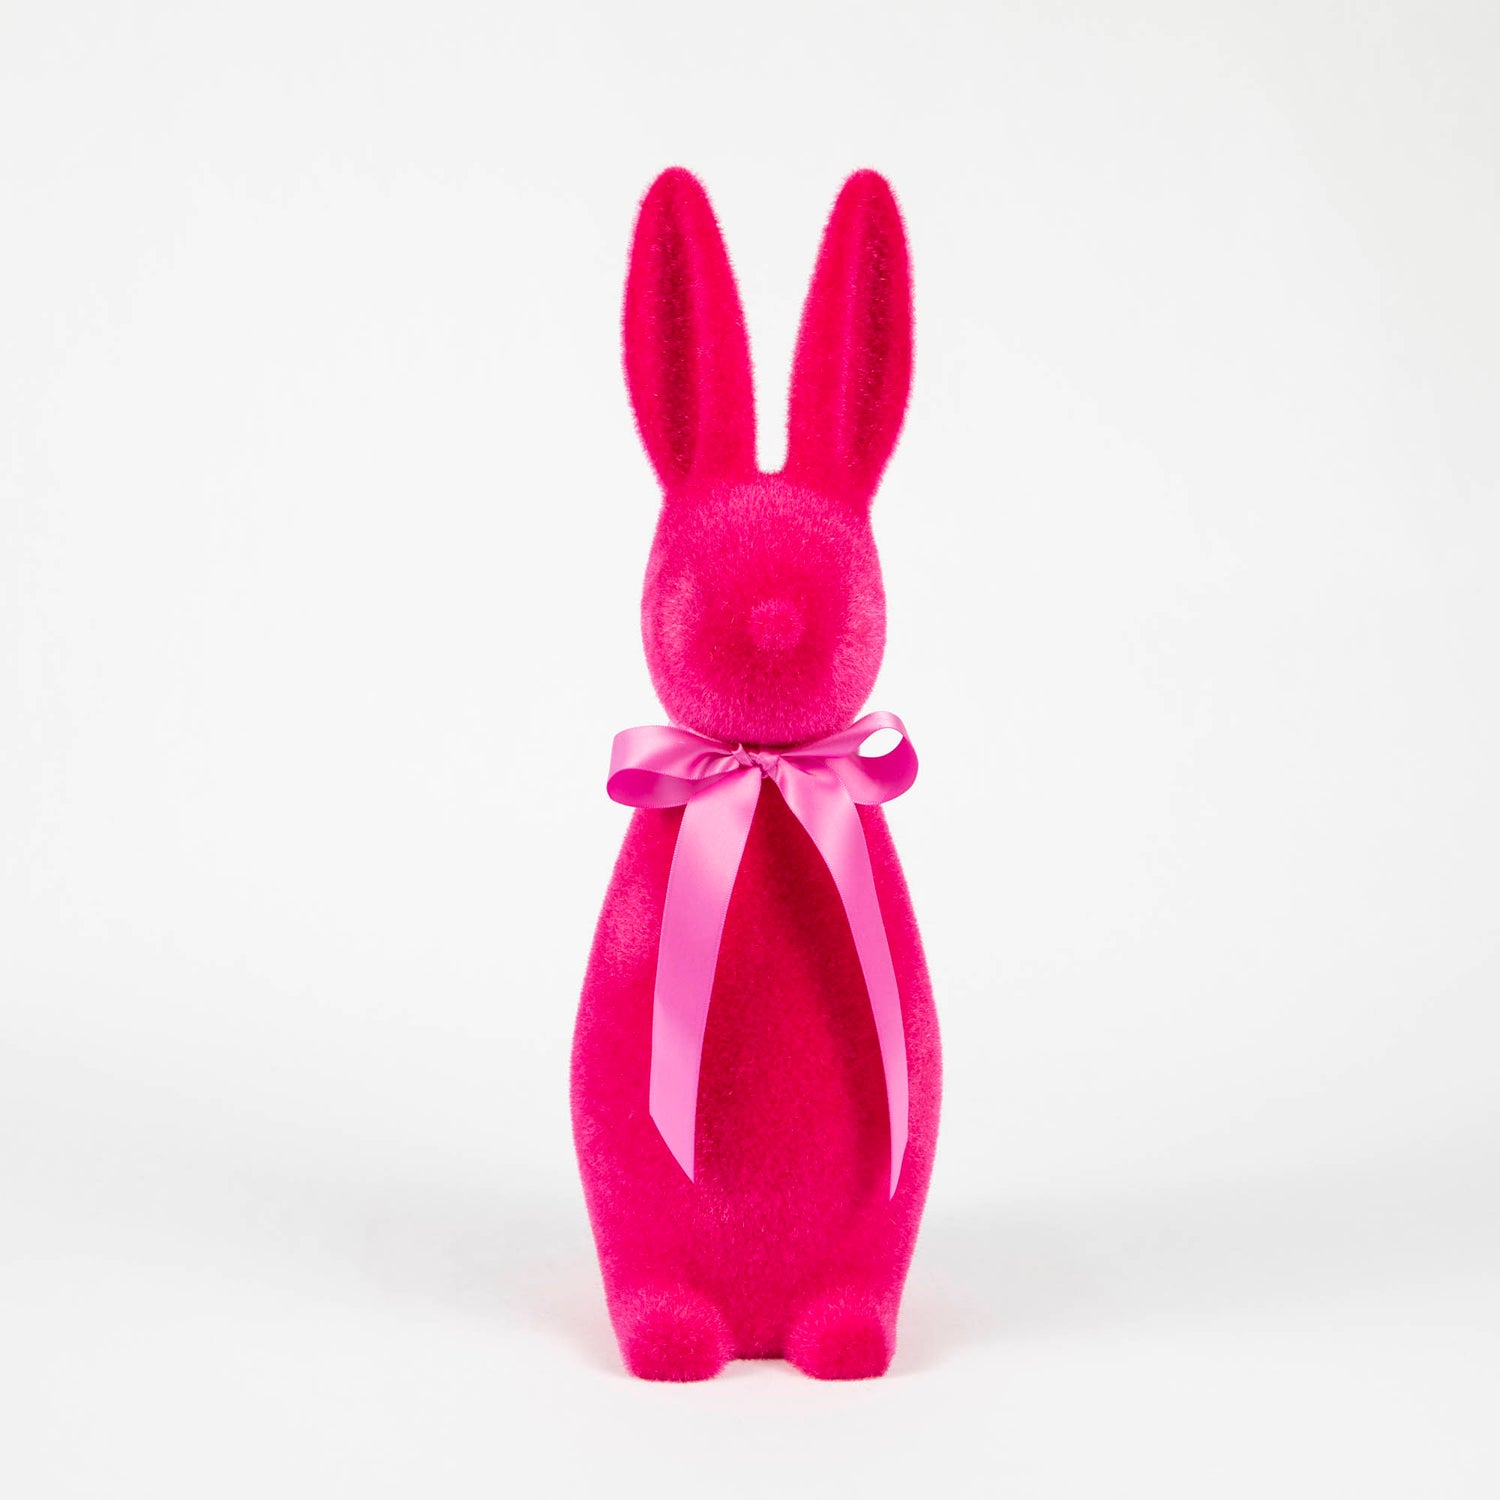 A soft Medium Flocked Button Nose Bunny with a pink bow on a white background from Glitterville.